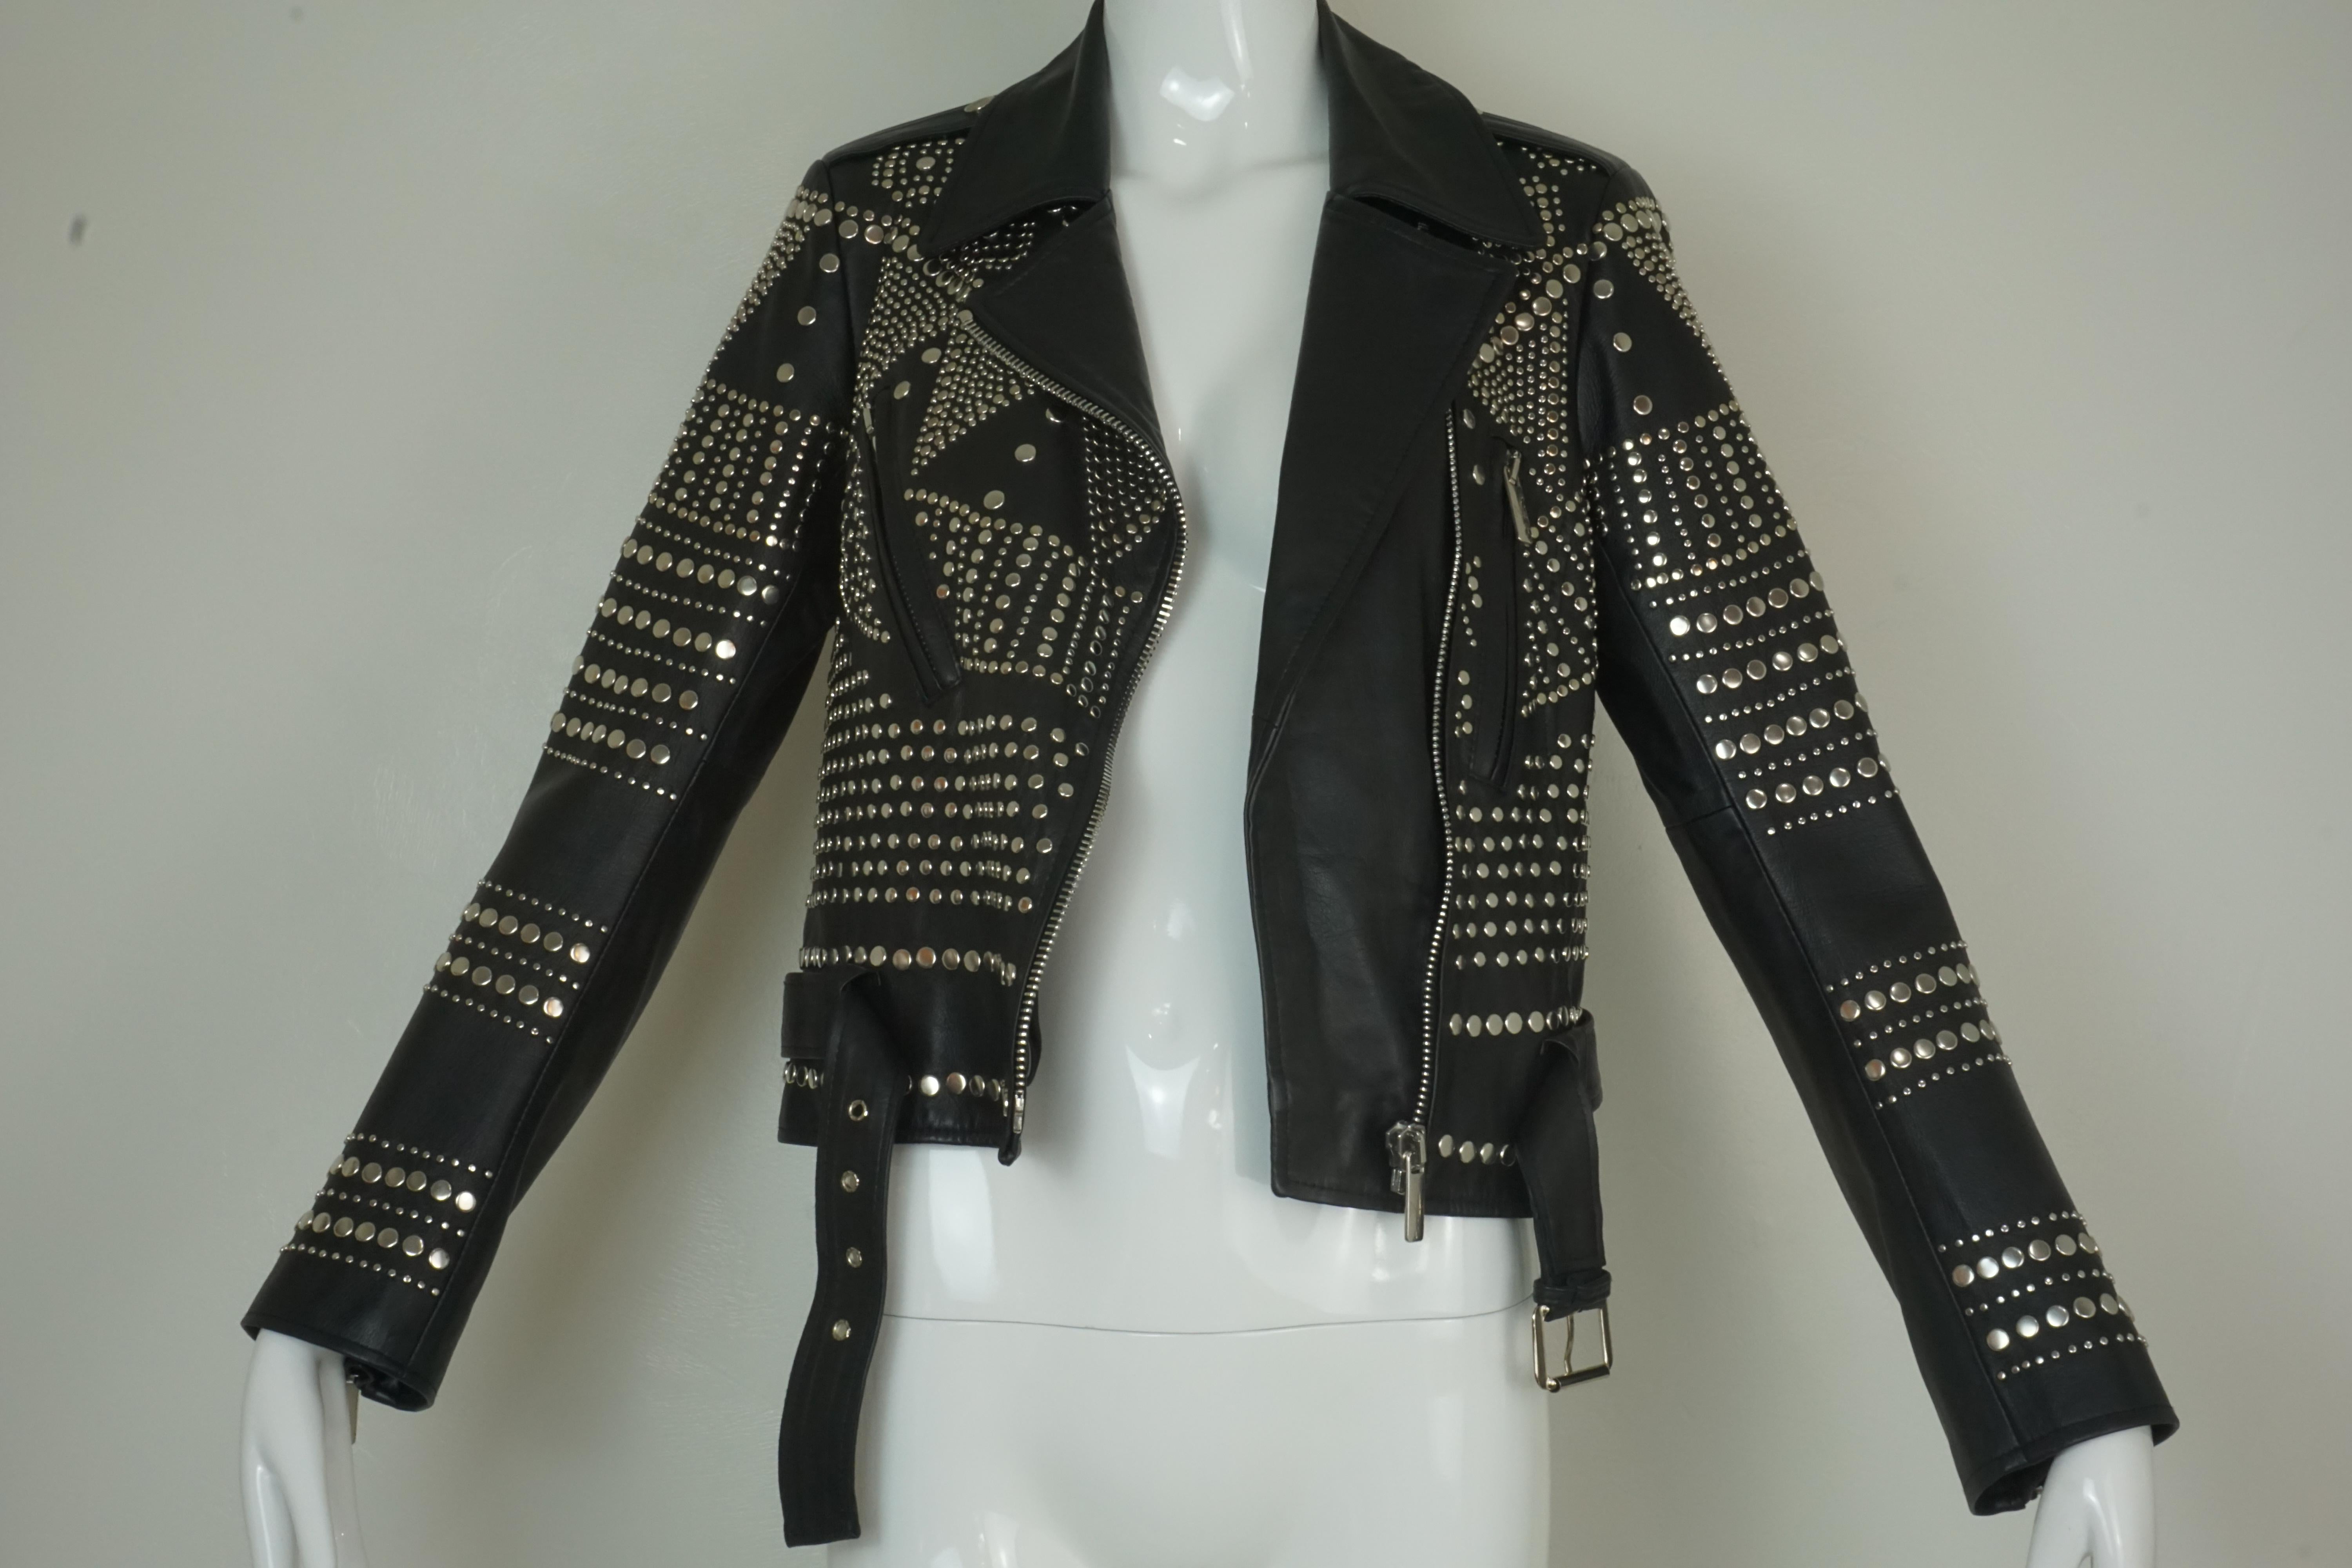 Nour Hammour Paris Studded Black Leather Motorcycle Jacket. Patterned silver studs at front, half belt with silver metal buckle, Full zip closure at front, quarter zippers at sleeves. 100% Lambskin treated in France, rayon lining. Size 38/6.  

Foxy